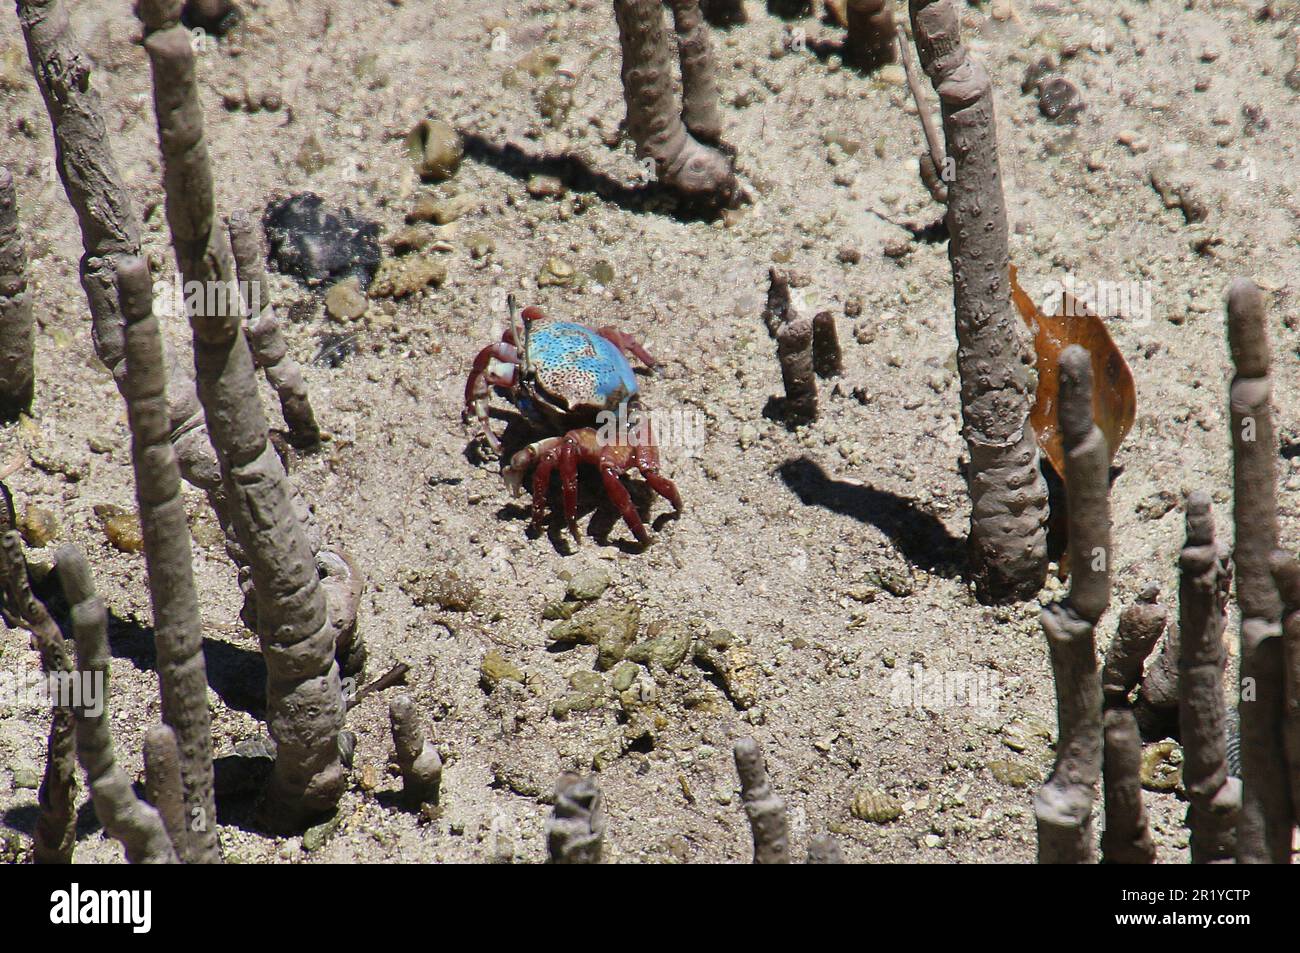 Fiddler crab (Uca tetragonon) without fully grown claws Photographed in a Mangrove swamp, Seychelles Curieuse Island in April Stock Photo